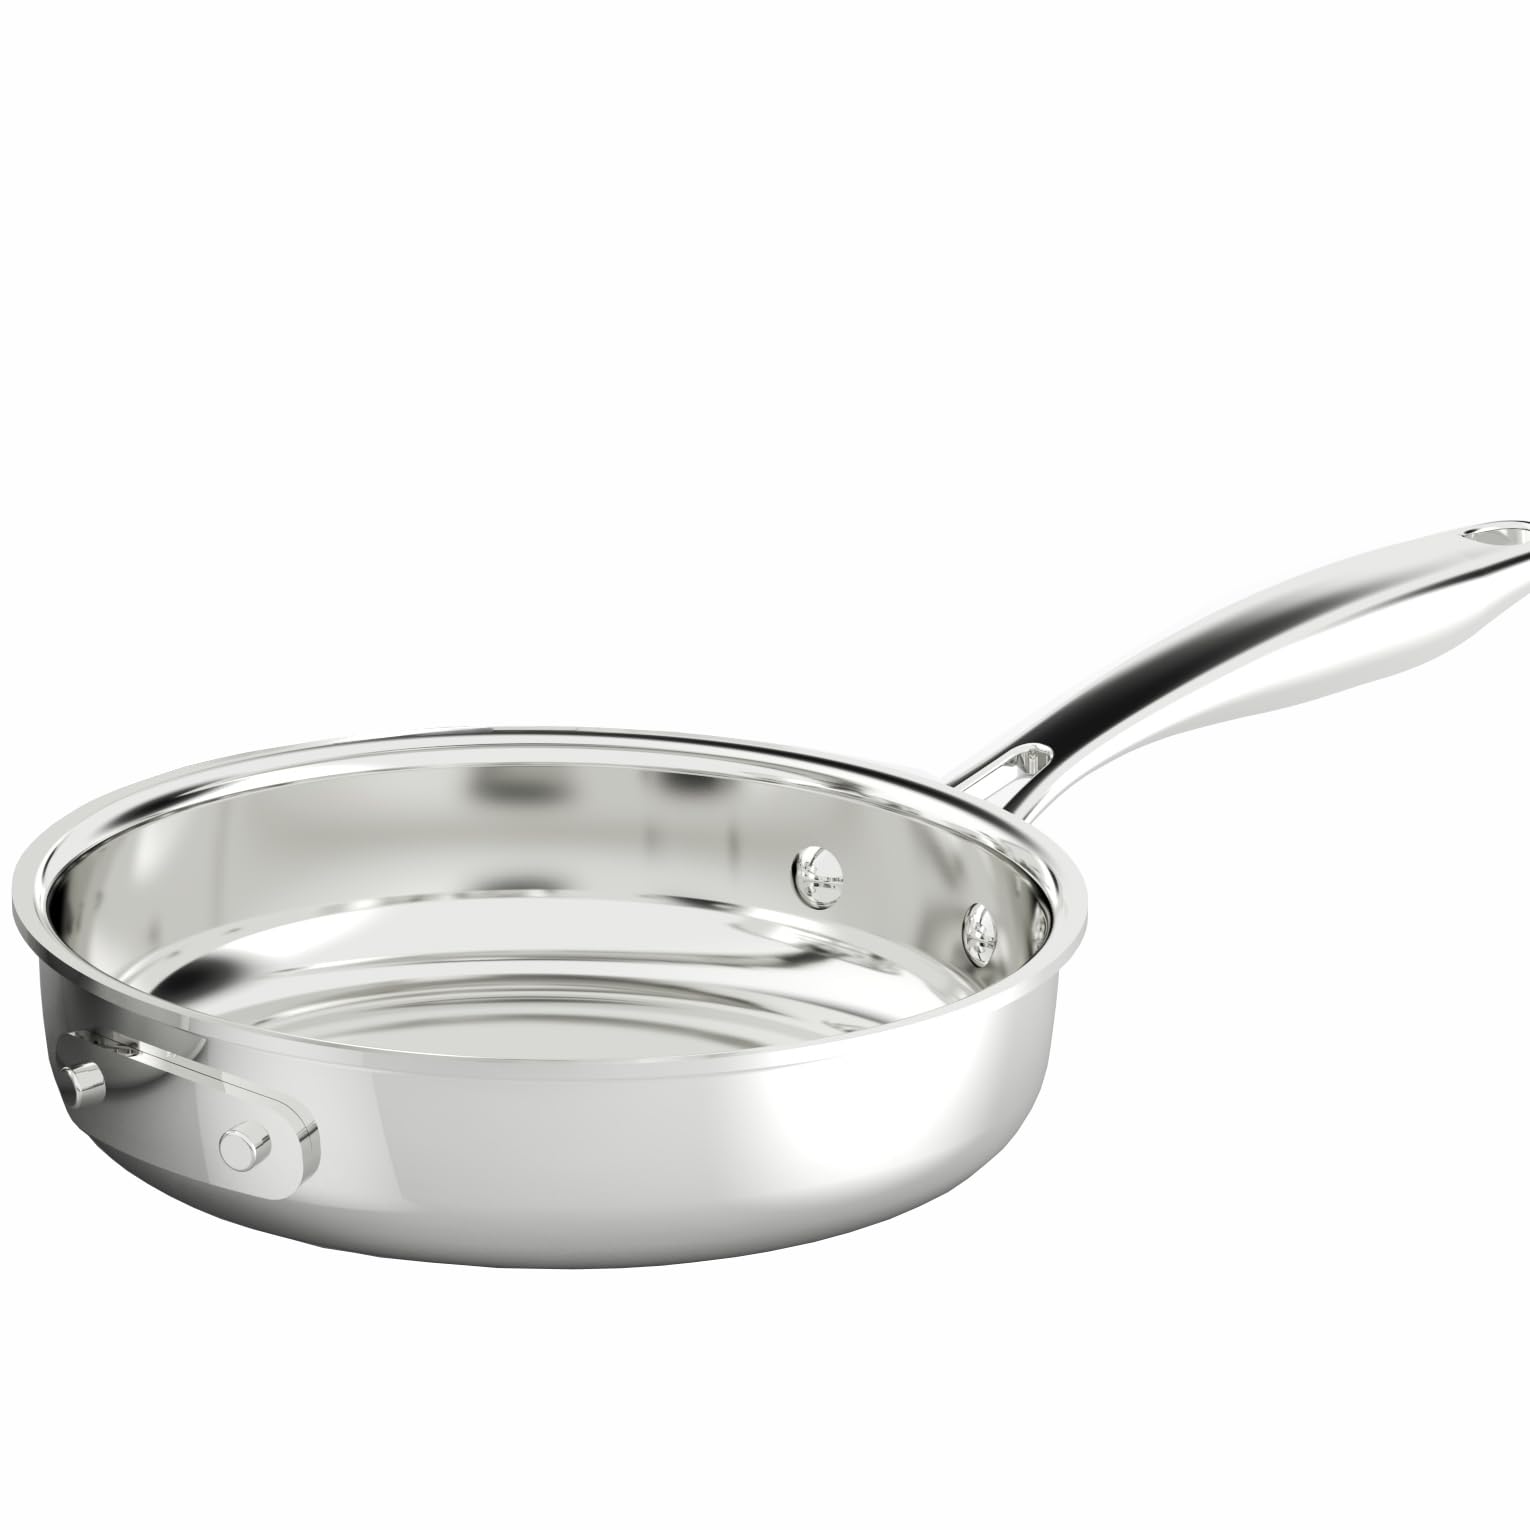 Nuwave Whole Body 3-Ply Stainless Steel Frying Pan Skillet 8